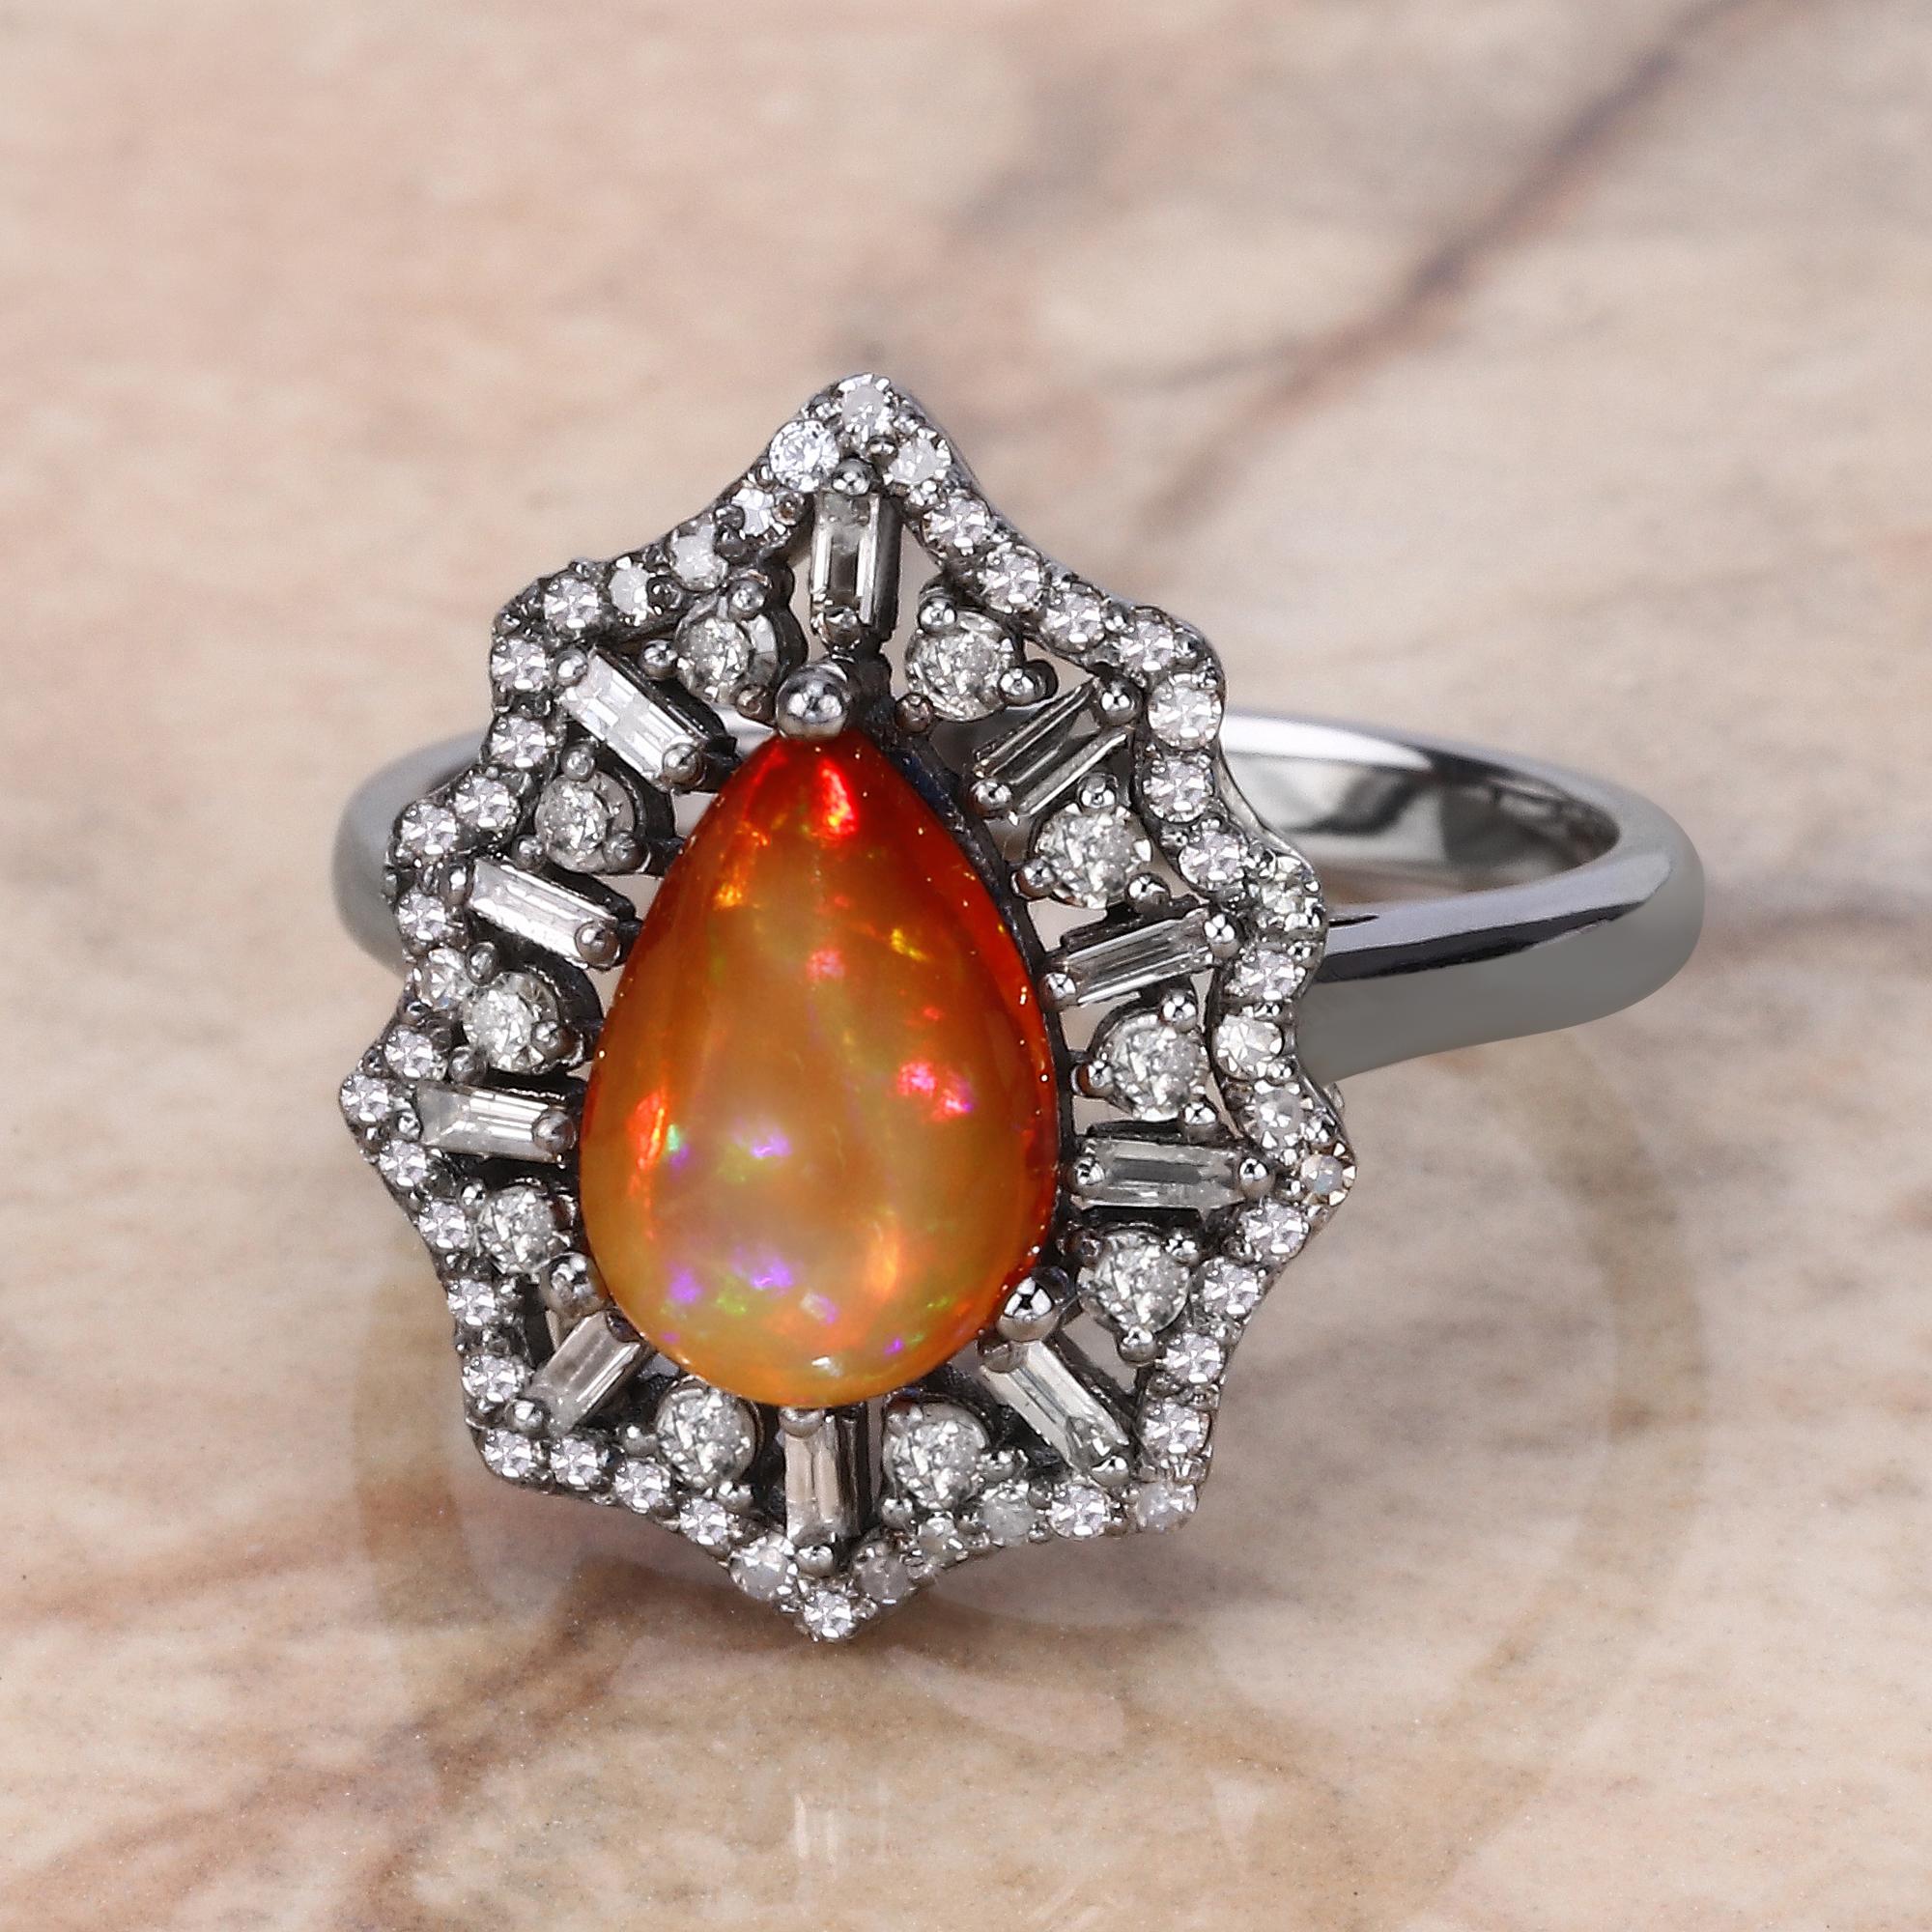 1.30cttw Ethiopian Opal with Diamonds 0.66cttw Sterling Silver Ring

Beautiful and elegant, our ring is a must-have for your jewelry collection. Intricately designed sterling silver beholds dazzling 1.30 ct. tw. pear-shaped rainbow opal cabachon